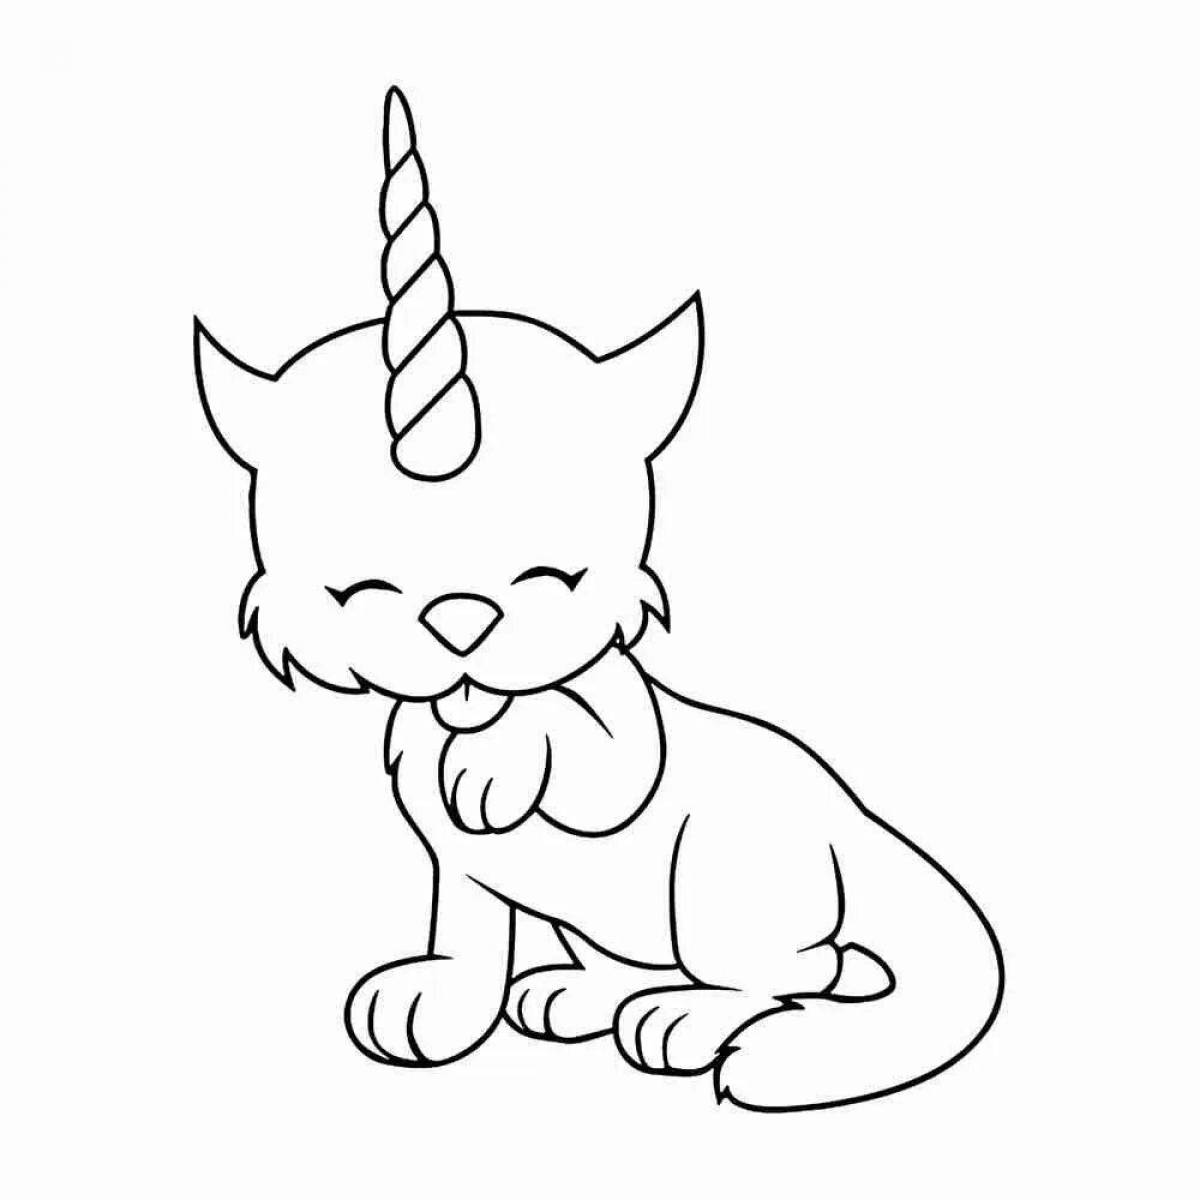 Coloring page adorable kitten